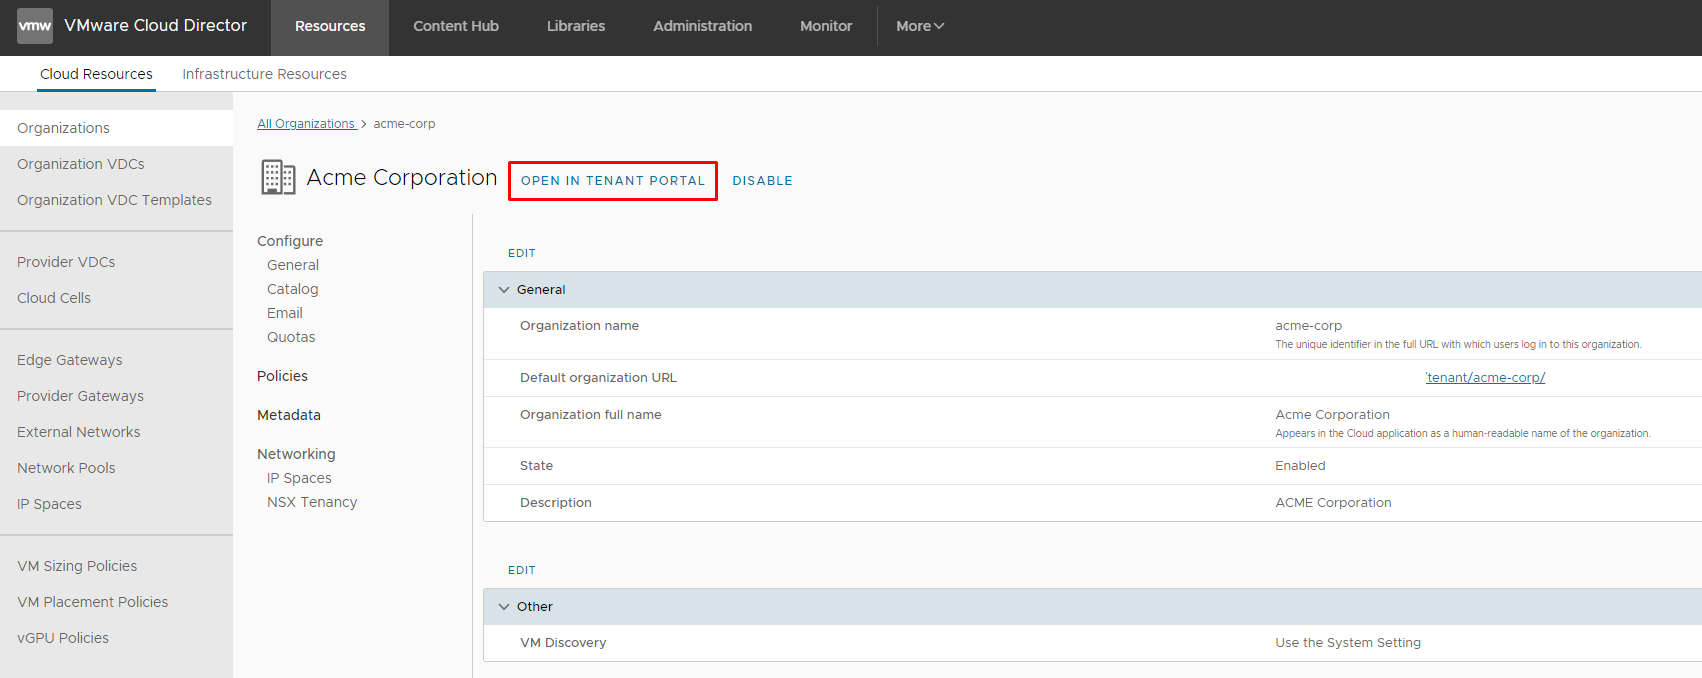 VMware Cloud Director OIDC / Import Users and Groups from Workspace One Access (Identity Manager)